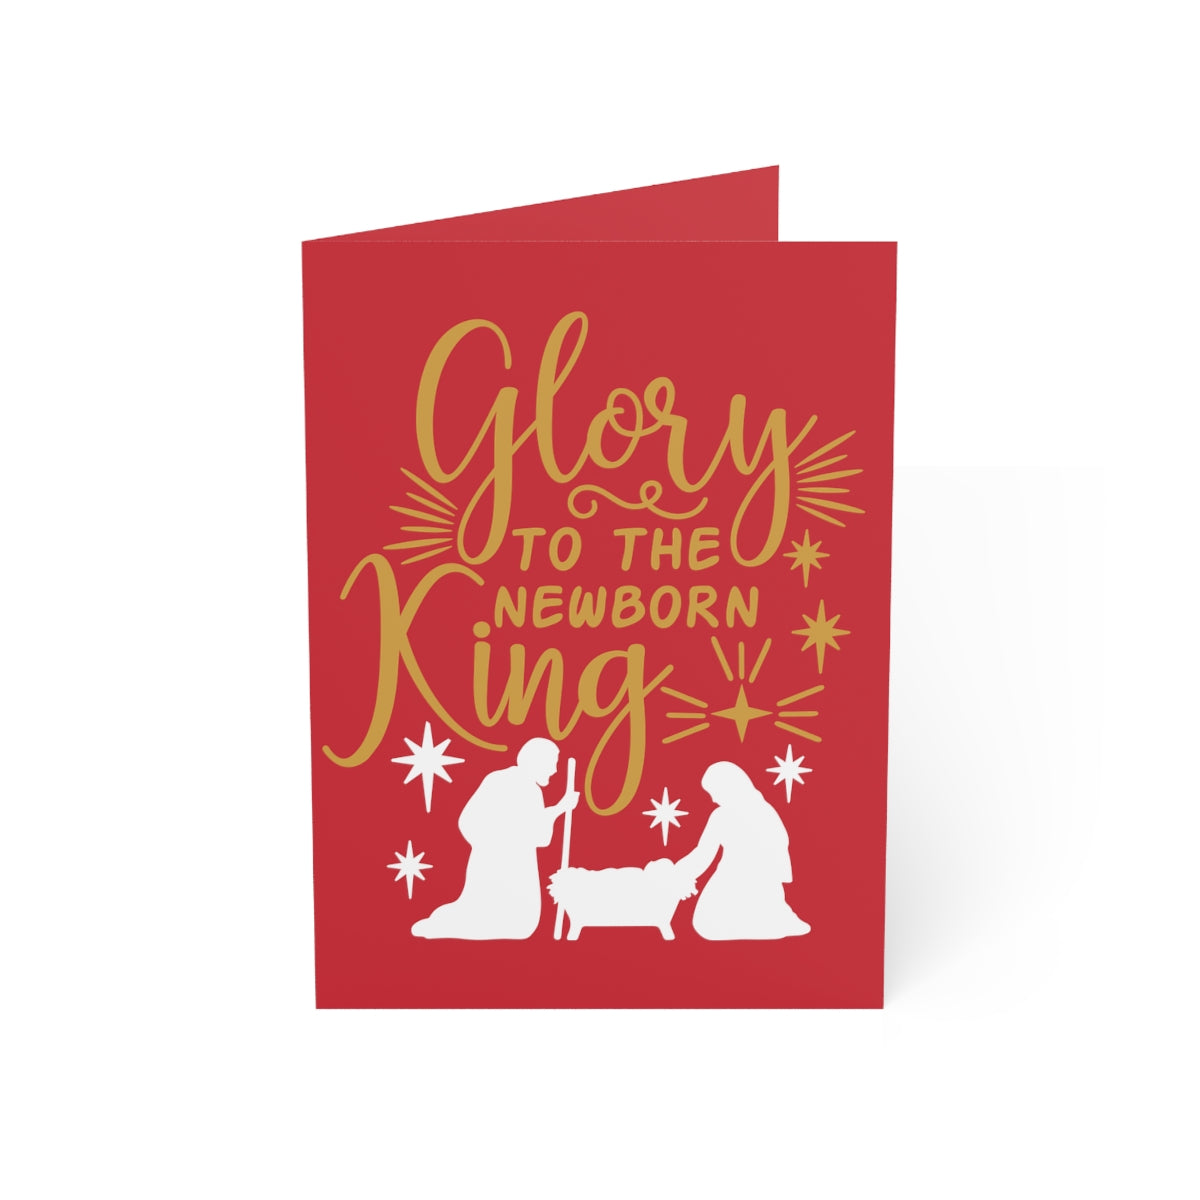 Glory to the King -  Greeting Cards (1, 10, 30, and 50pcs)